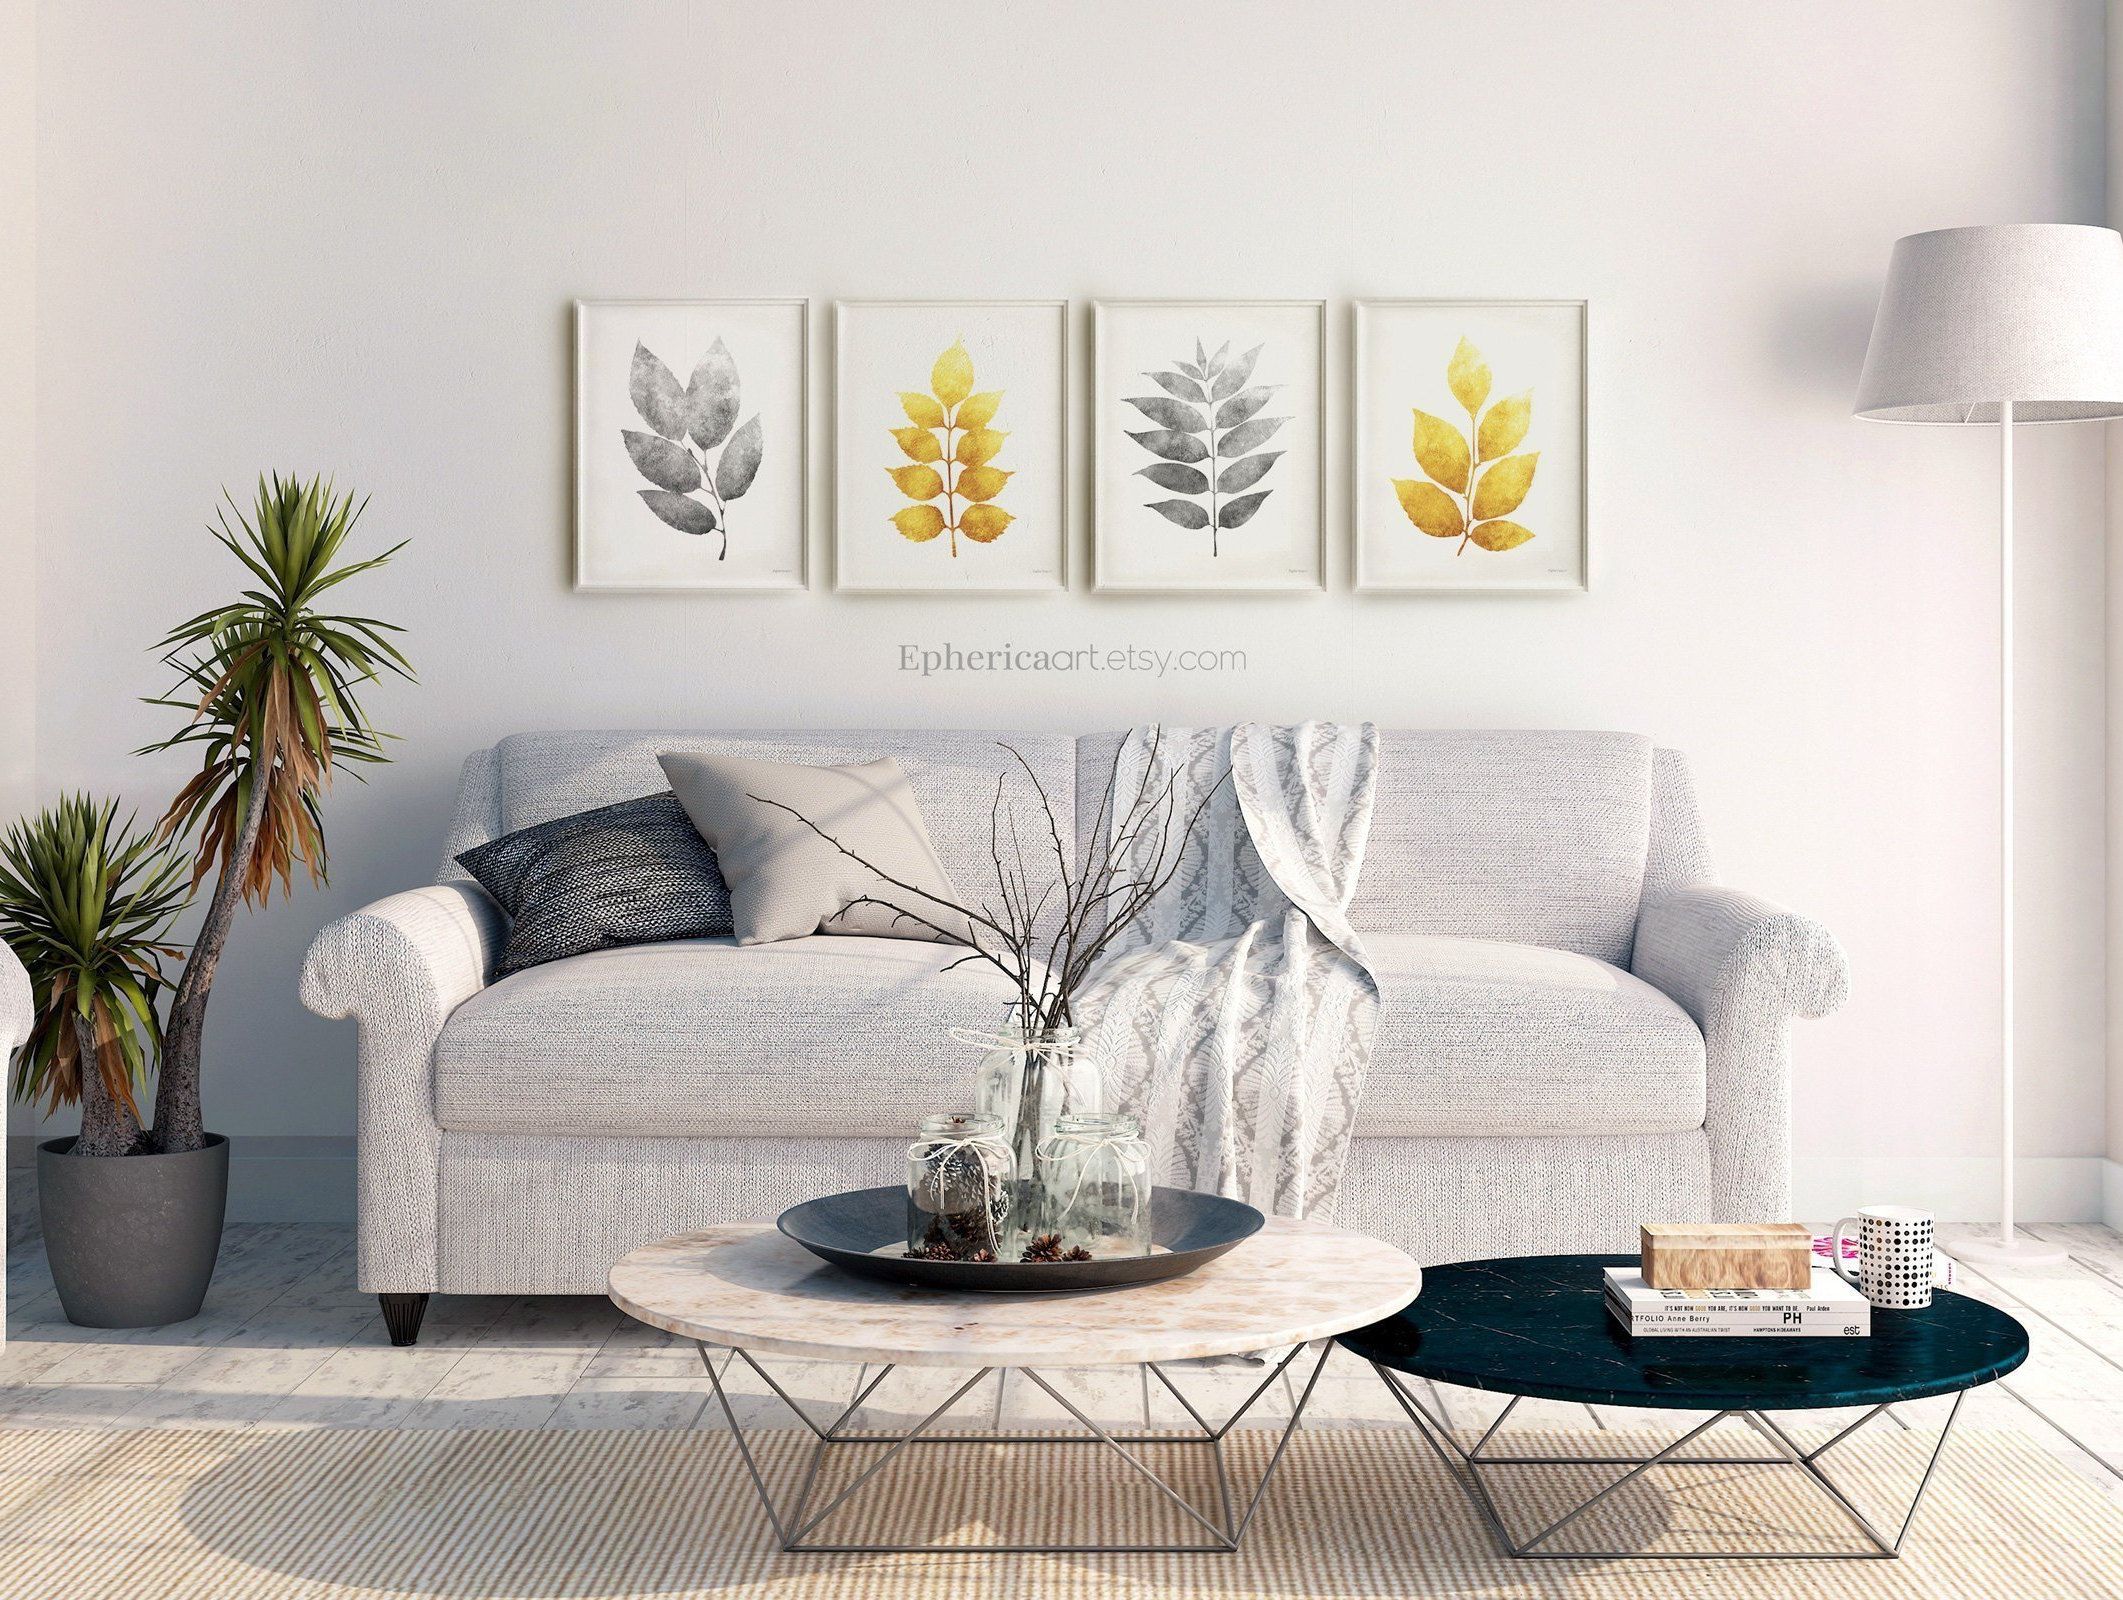 Wall Decor Set Of Prints, Gray And Yellow Wall Art Set Of 4 Leaves Prints,  16x20 Printable Home Decor Living Room Decor, 4 Piece Wall Decor Within 4 Piece Wall Decor Sets (View 25 of 30)